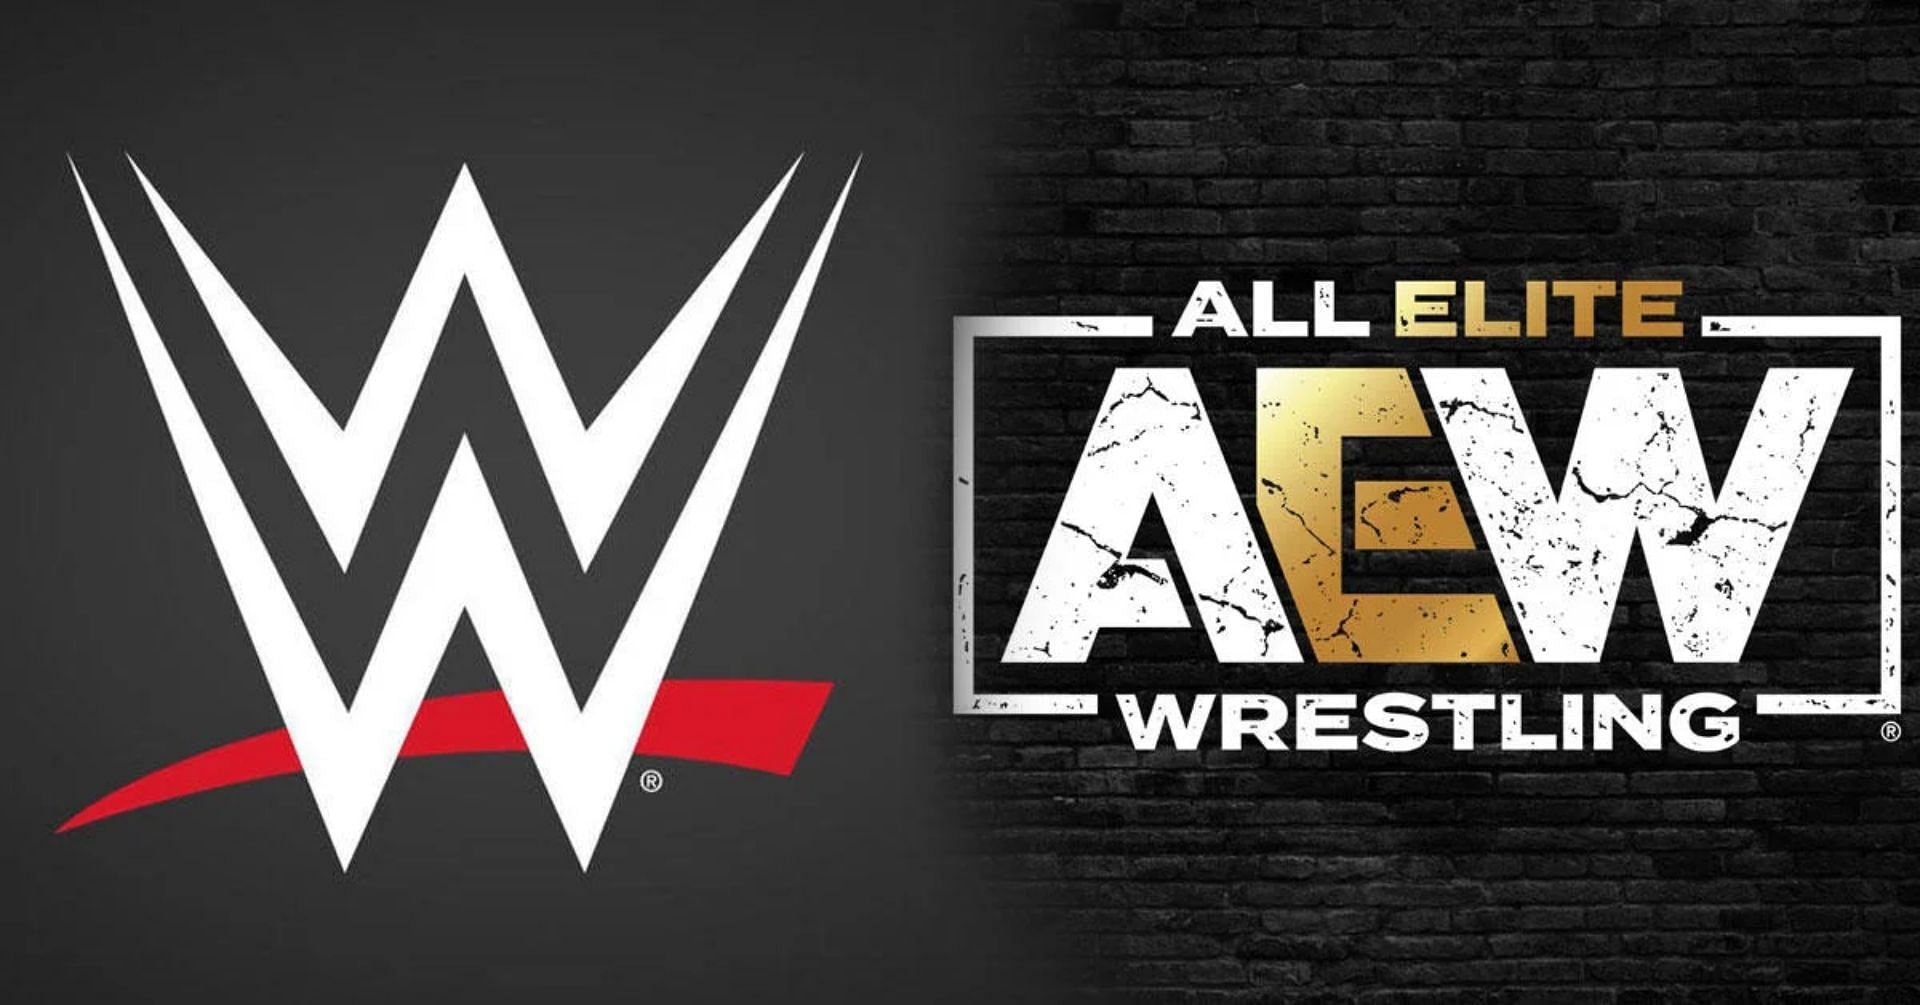 Many former WWE Stars have made the move to AEW.